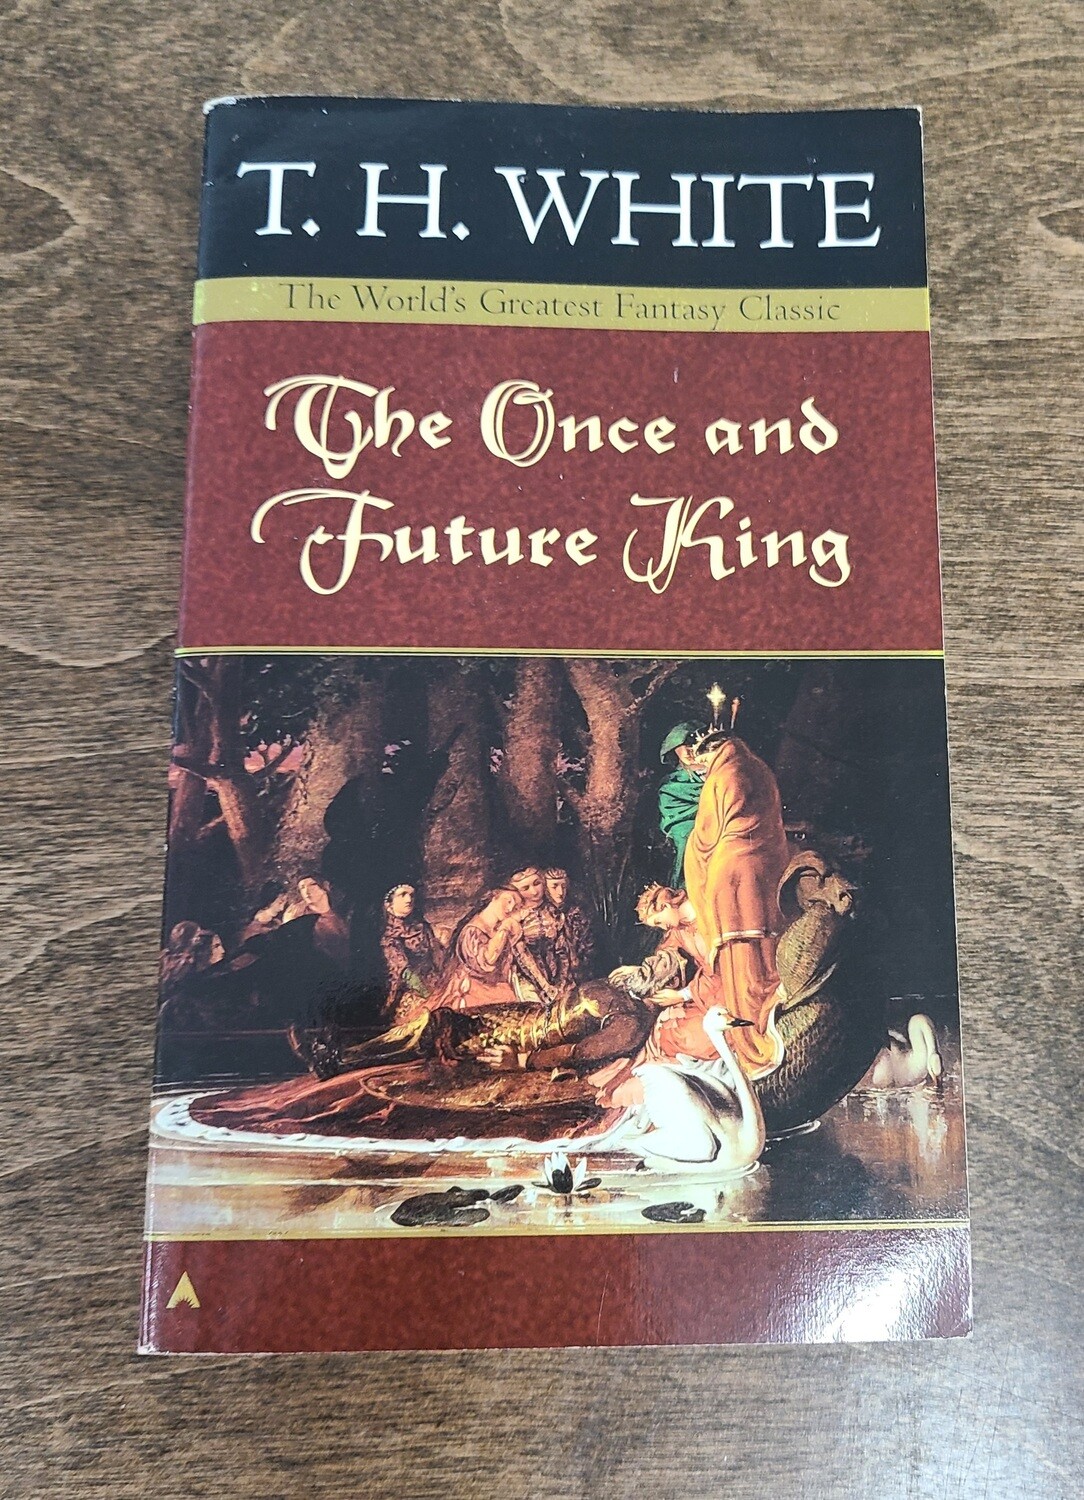 The Once and Future King by T. H. White